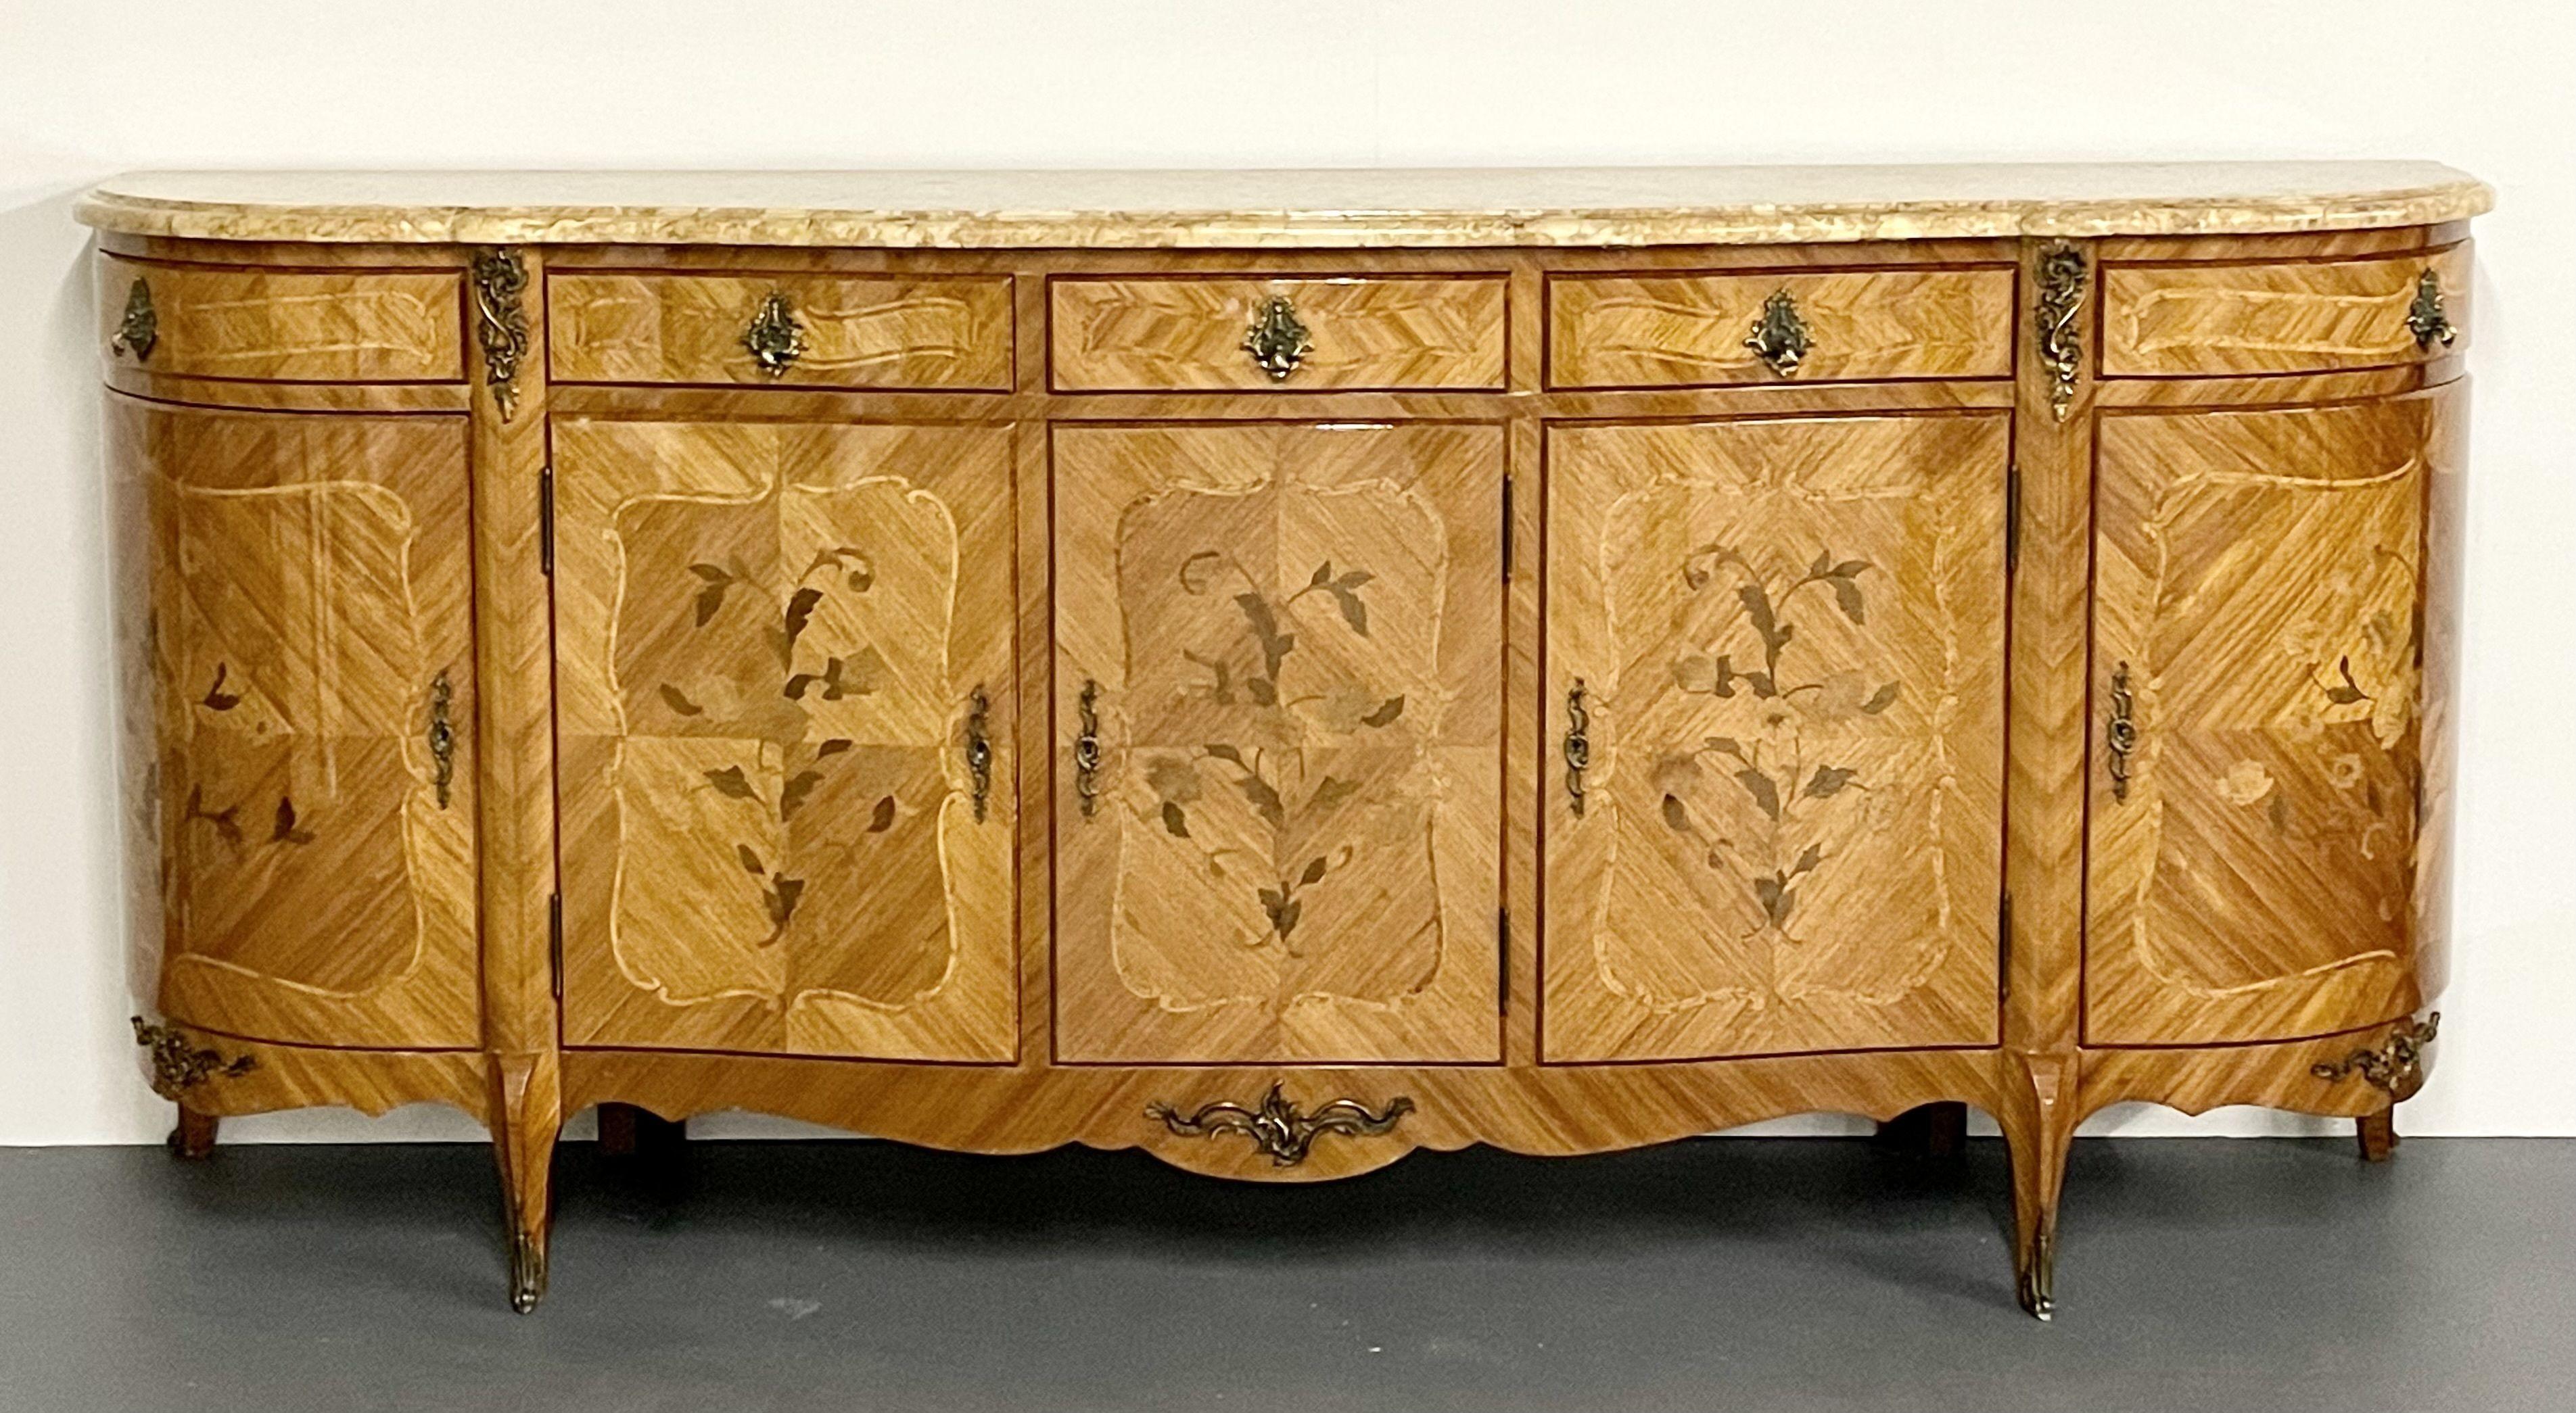 A French Inlaid Louis XV style sideboard, Credenza, Buffet of Monumental Form having a 1 1/4 inch think marble top supported by a vintage custom cabinet maker case having five bowed doors all with inlaid floral decoration. Each door having fitted